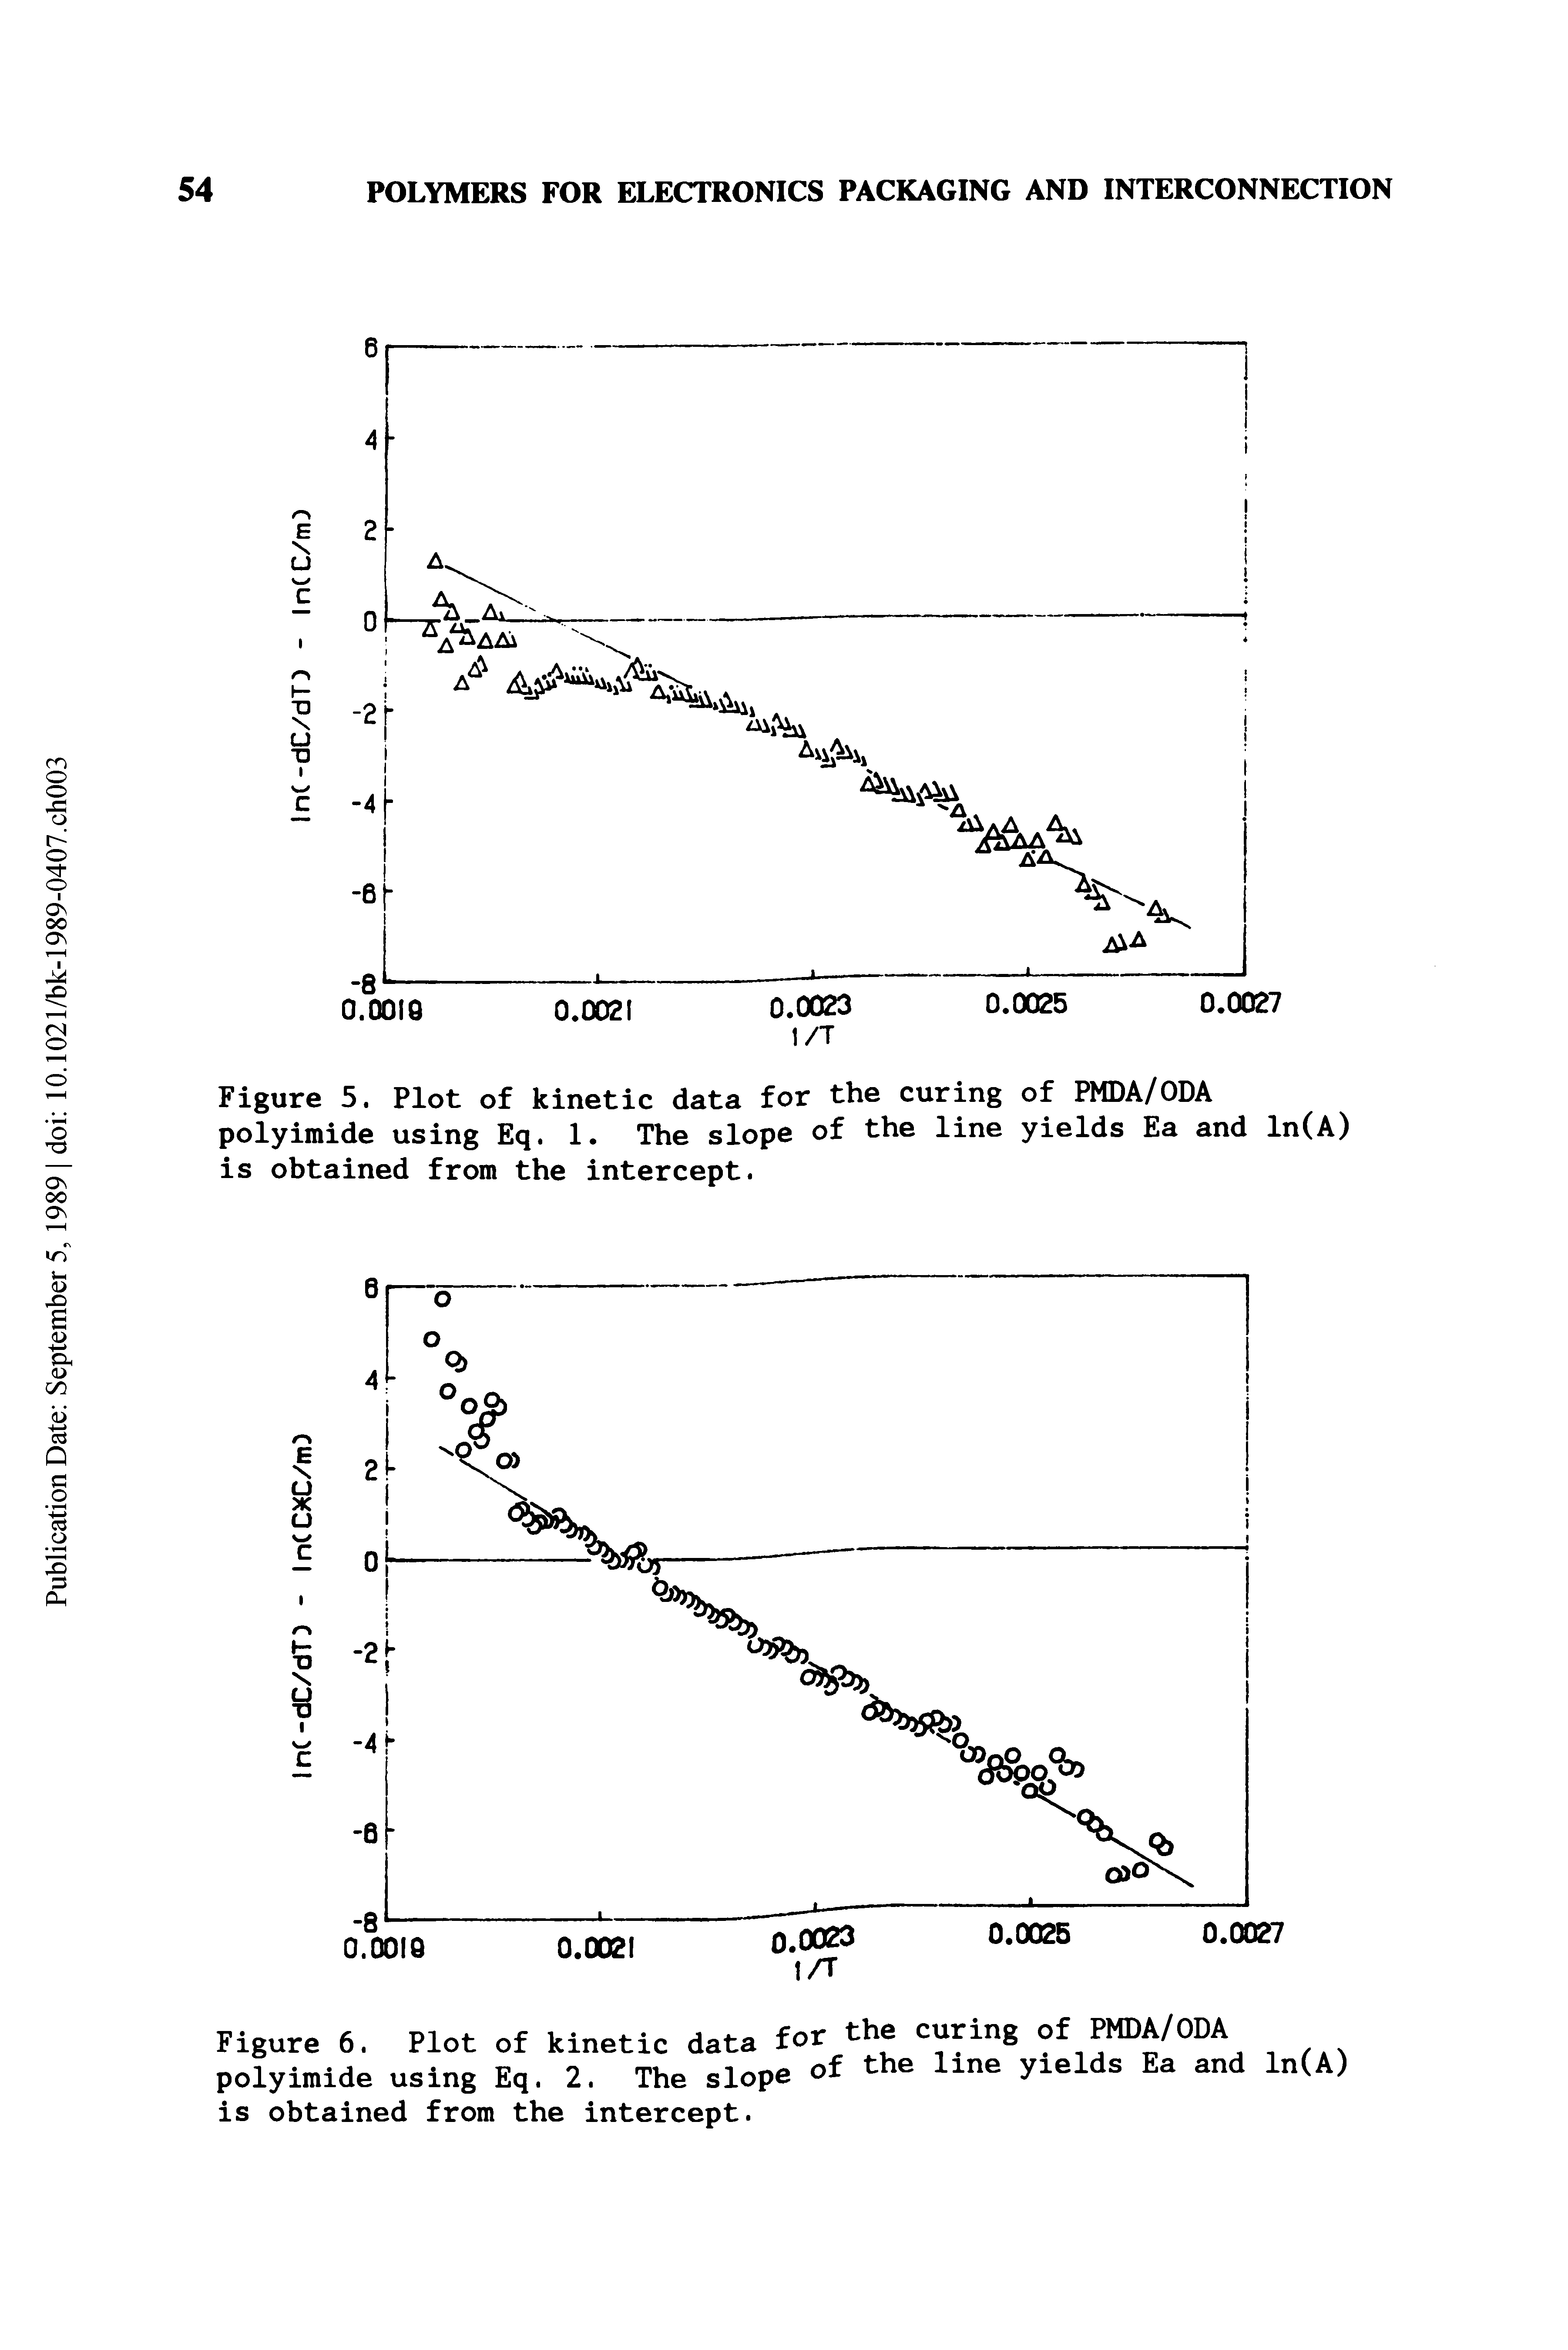 Figure 5. Plot of kinetic data for the curing of PMDA/ODA polyimide using Eq. 1. The slope of the line yields Ea and ln(A) is obtained from the intercept.